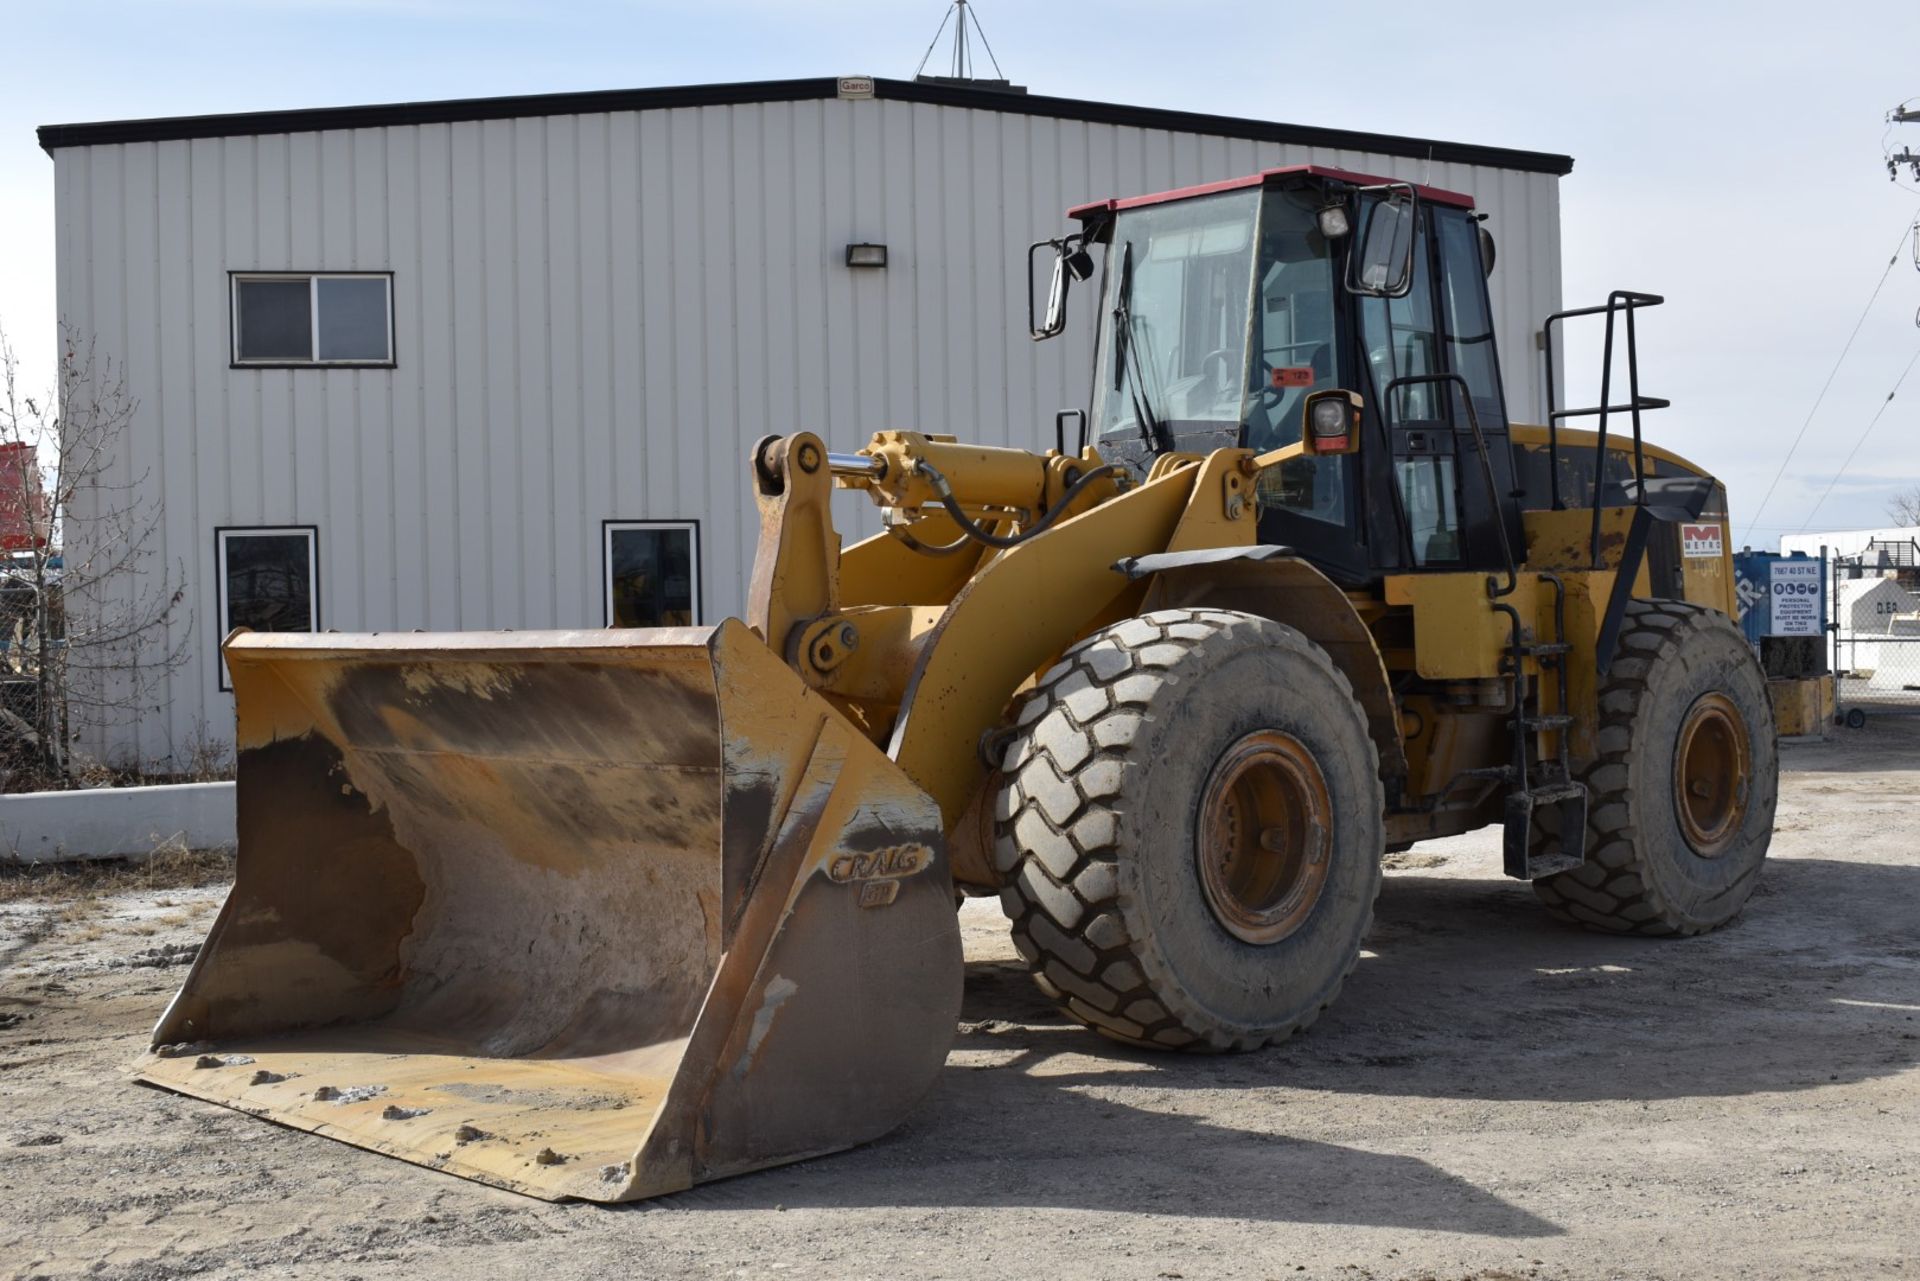 CATERPILLAR (1999) 966G ARTICULATING FRONT END WHEEL LOADER WITH BUCKET, APPROX. 16,425 HOURS (